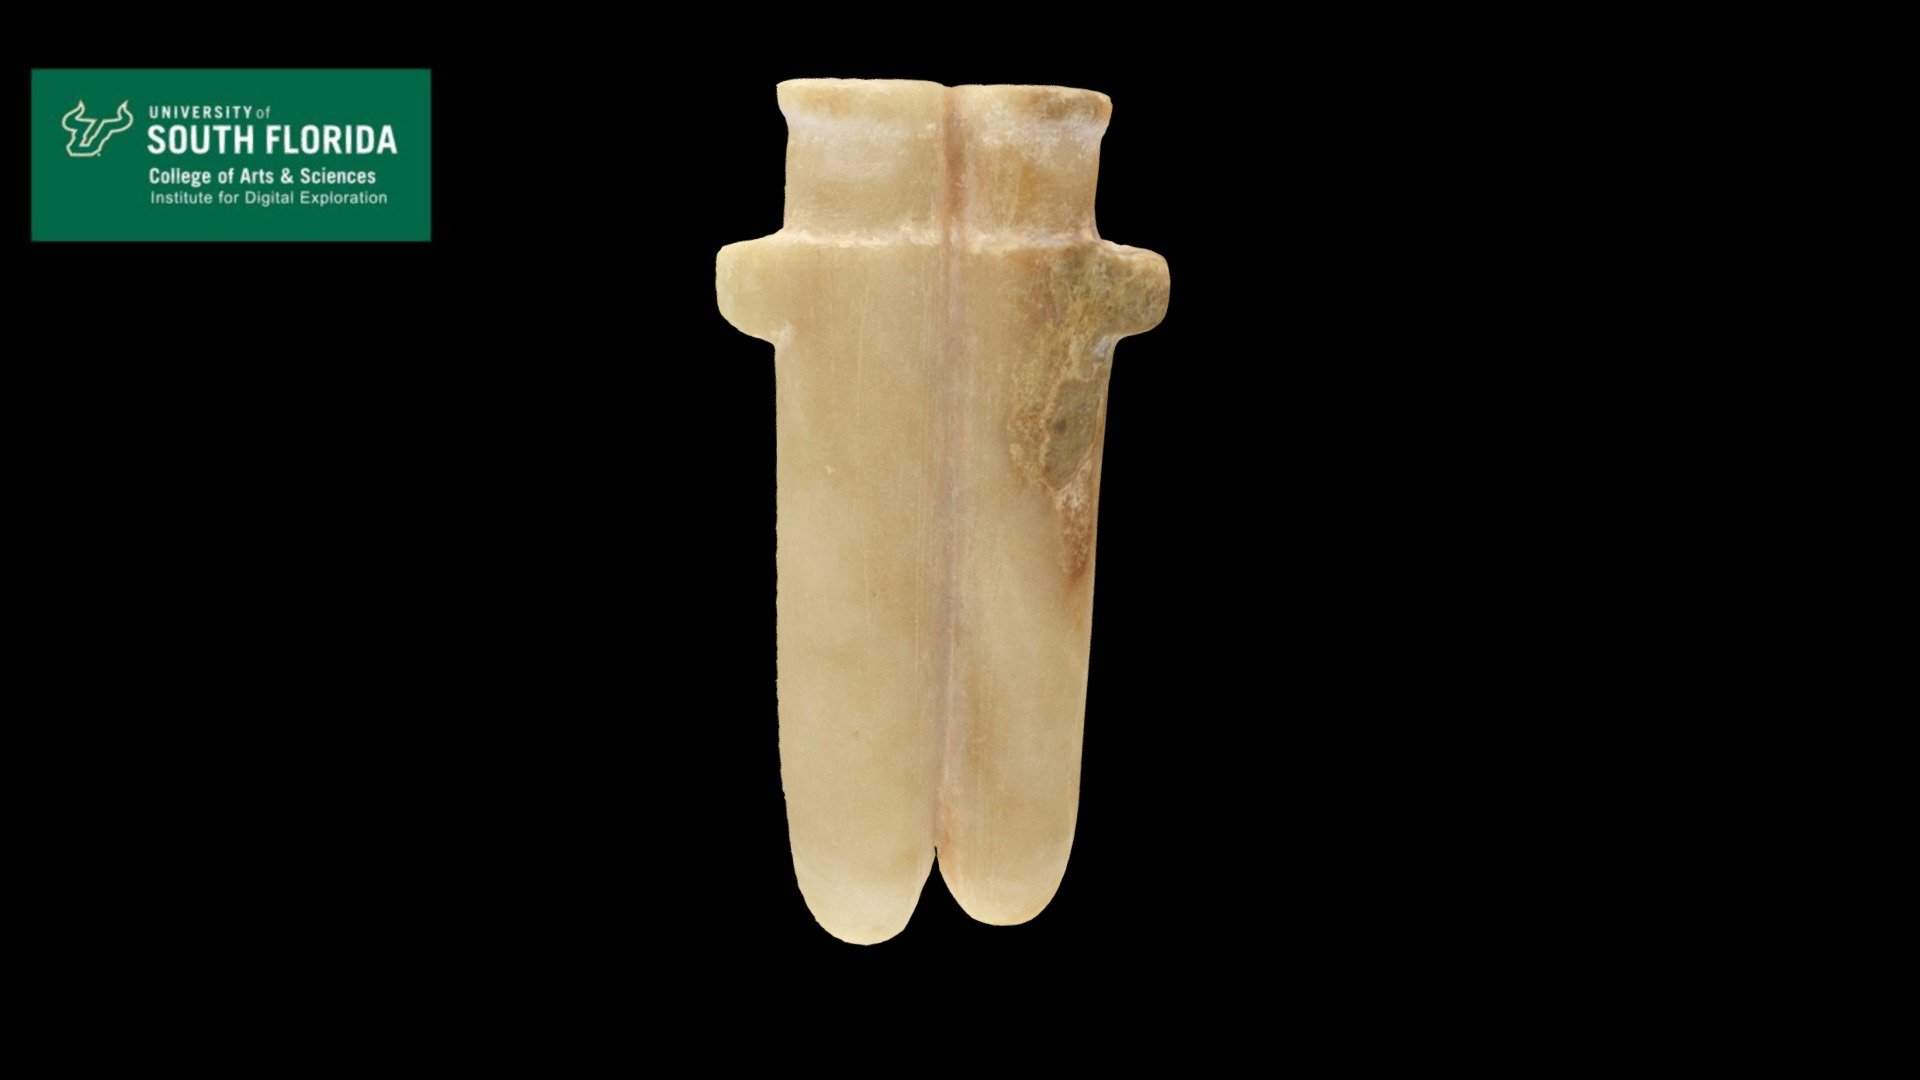 Description: The two-vial unit, joined along one wall, is carved from one piece of alabaster. The holes are drilled for the cavity of the vials and through the handles on either side. The drilled holes are off-center in one vial and in both handles. The walls of the vessel are translucent.

Measurements (cm): H: 8.9 W: 4.4 L: 1.7

References: None

This model was created with 144 images at 6000 x 4000 resolution in Agisoft Photoscan Professional 3d model